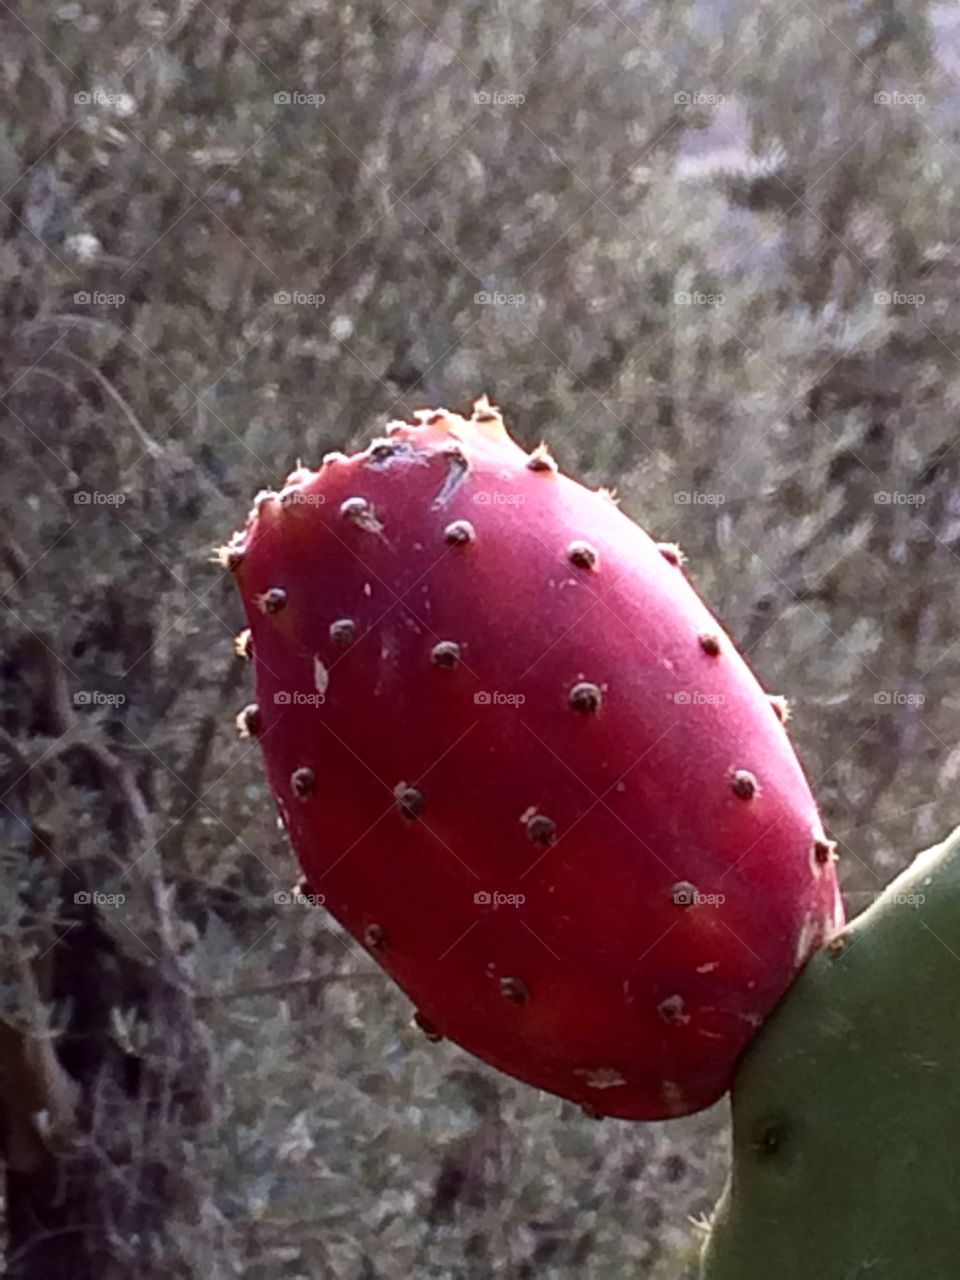 Cactus fruit in Southern Spain